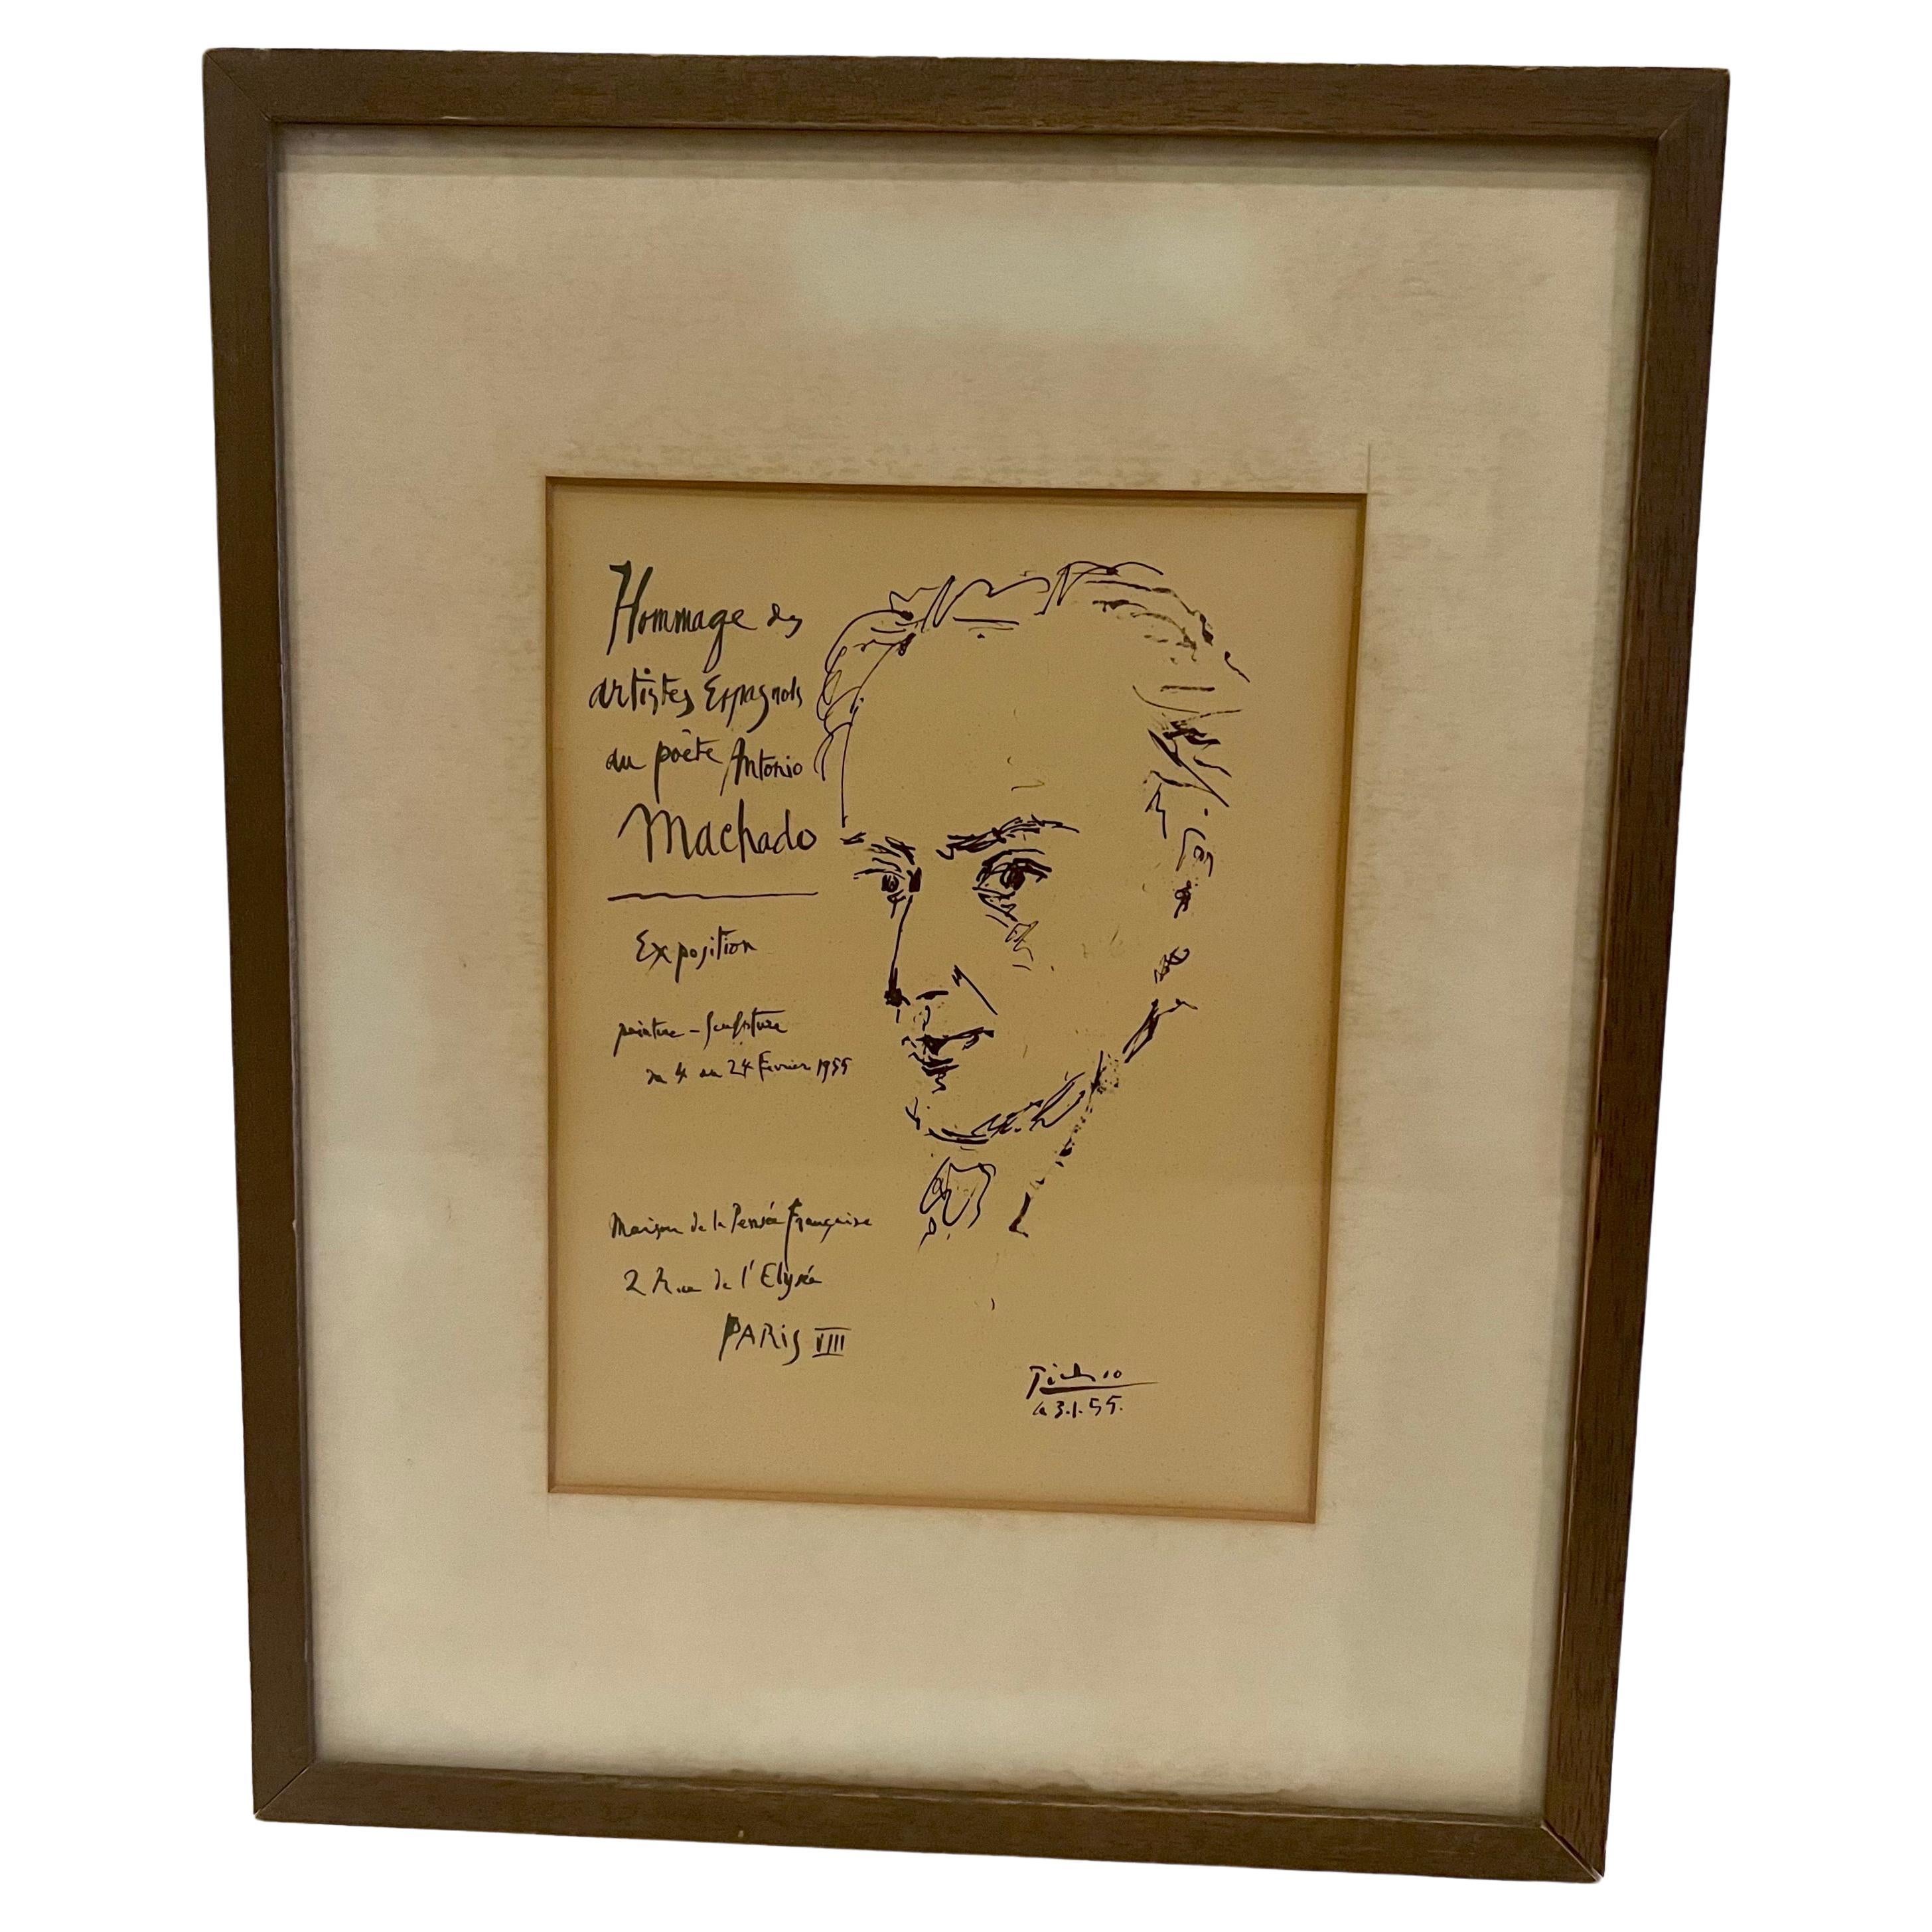 Nicely framed original vintage lithograph in a walnut frame with glass, hommage to Antonio Machado Poet.